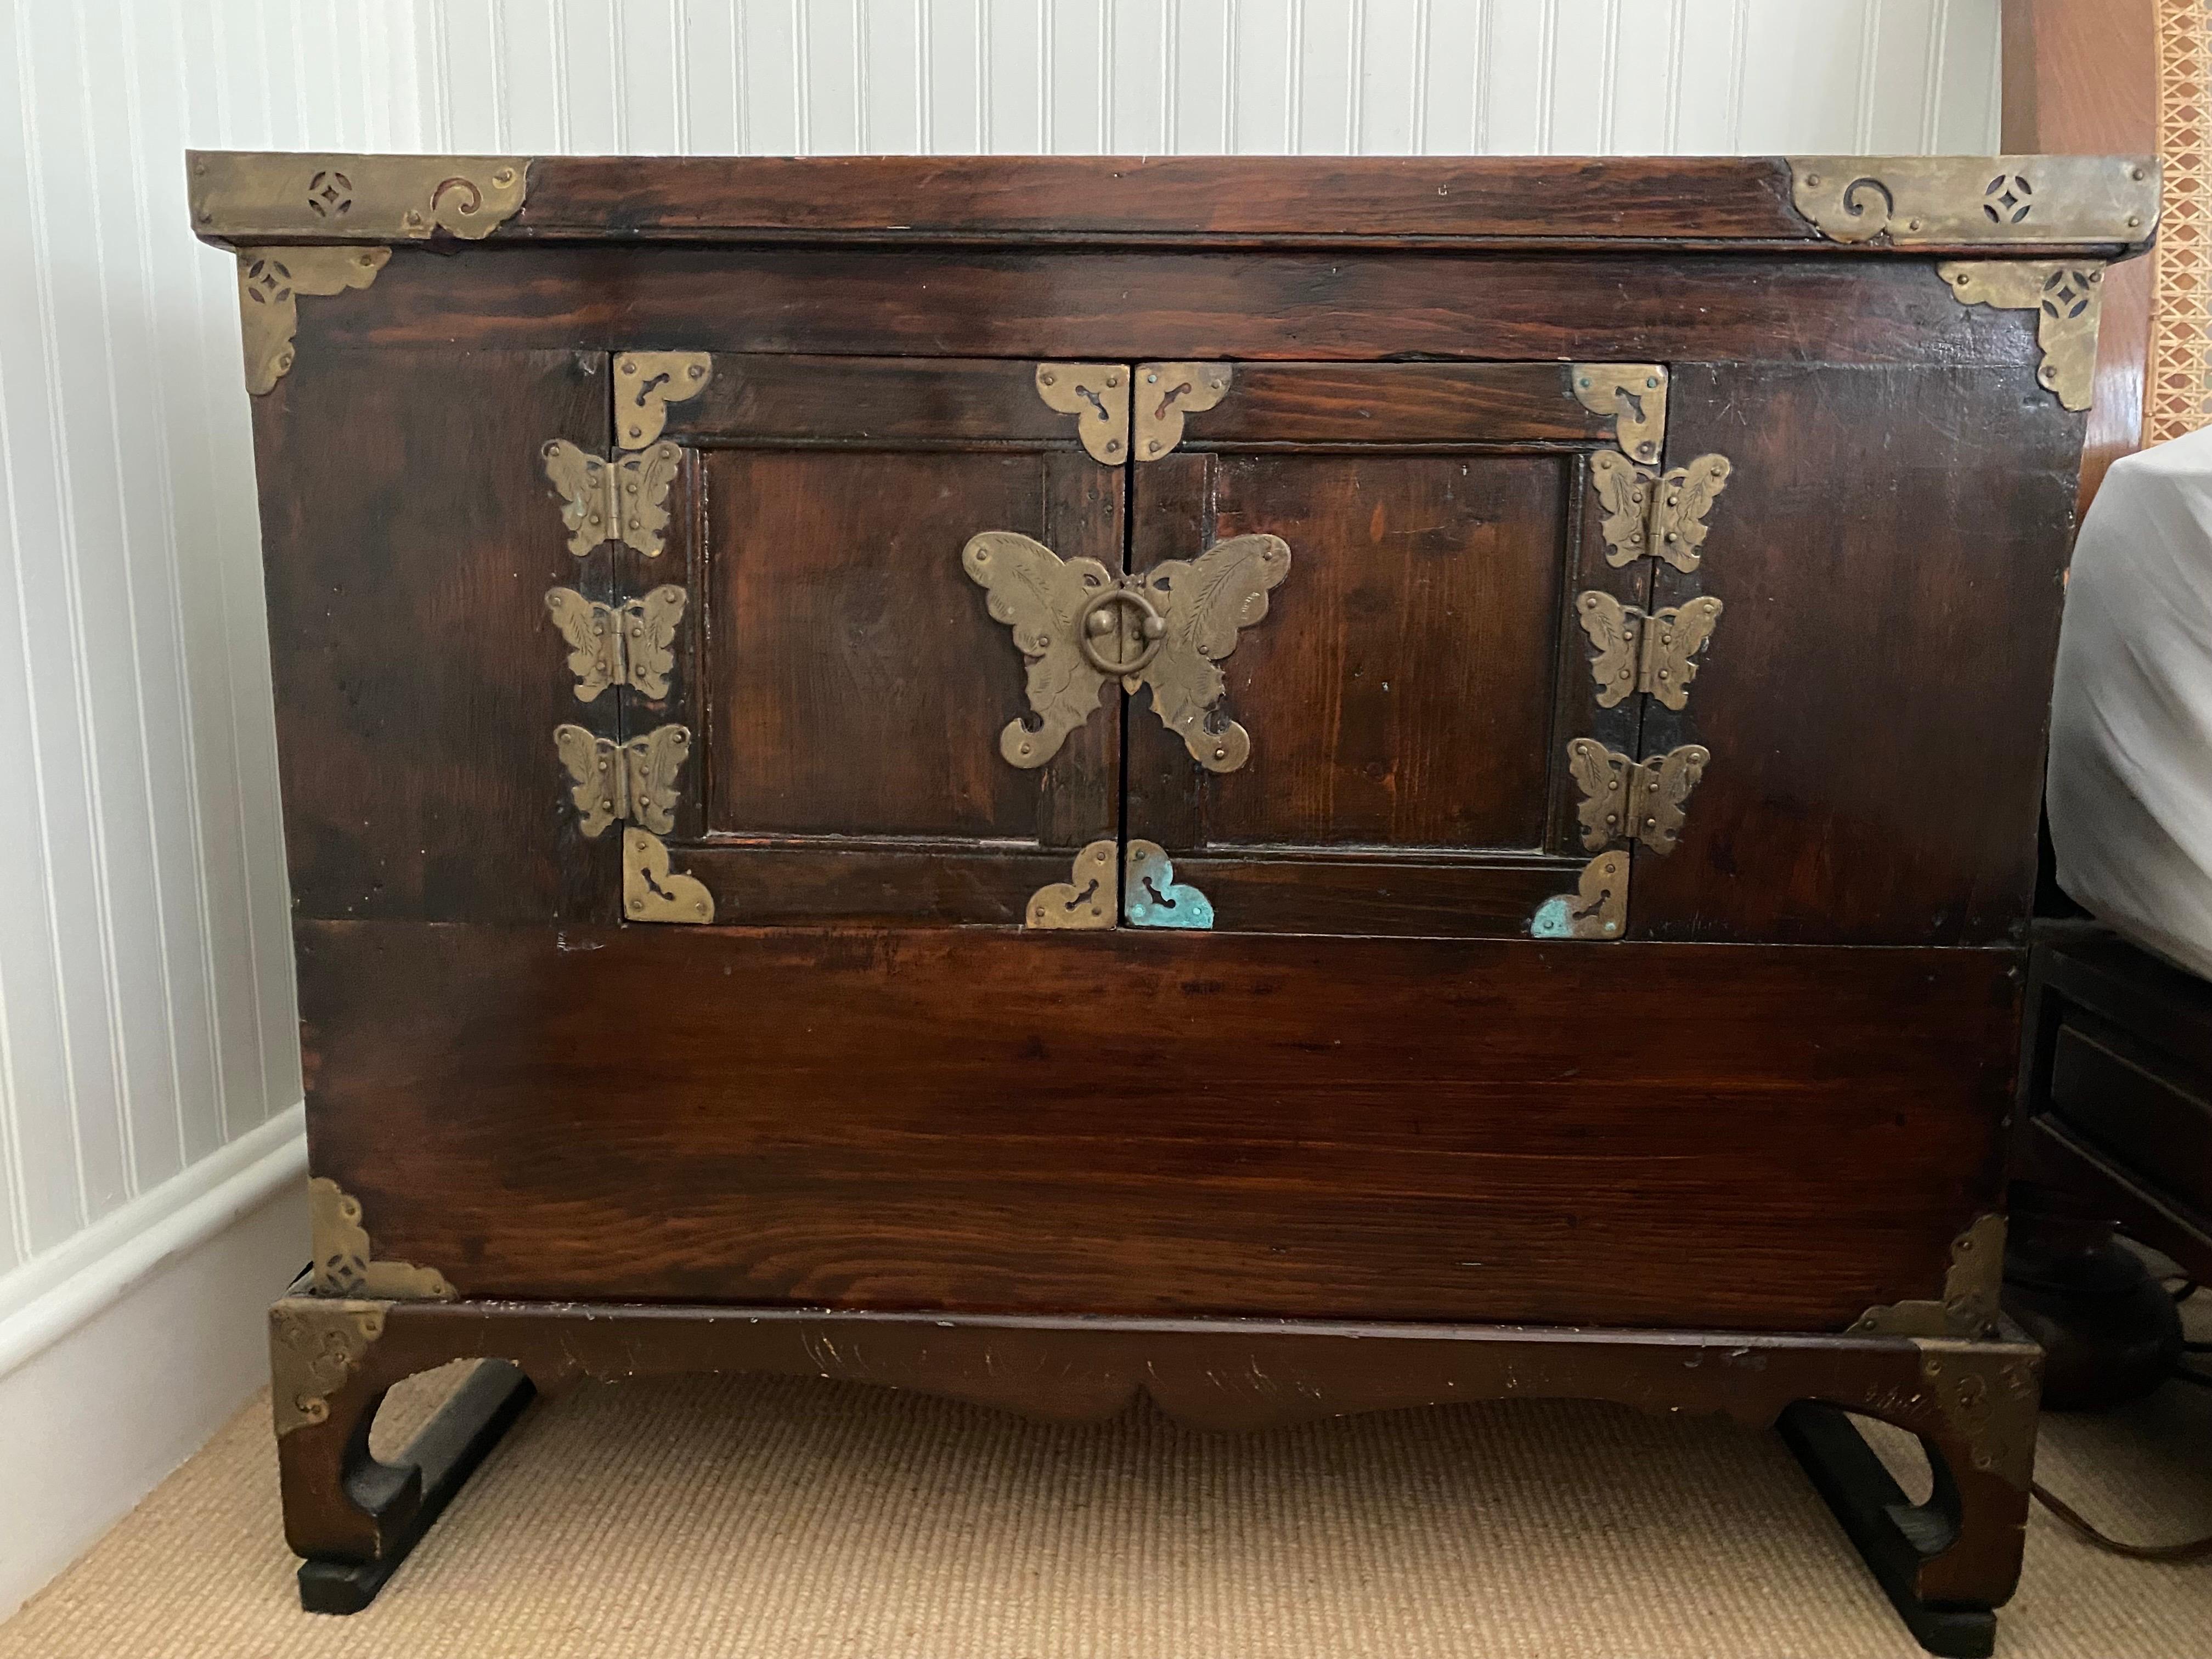 Chinese Kang Low Two Door Cabinet on Stand, 19th Century
A lovely wooden box with elaborate brass butterfly hardware on two doors which open to a storage area, sitting on a small stand.  General wear consistent with age and use. good overall